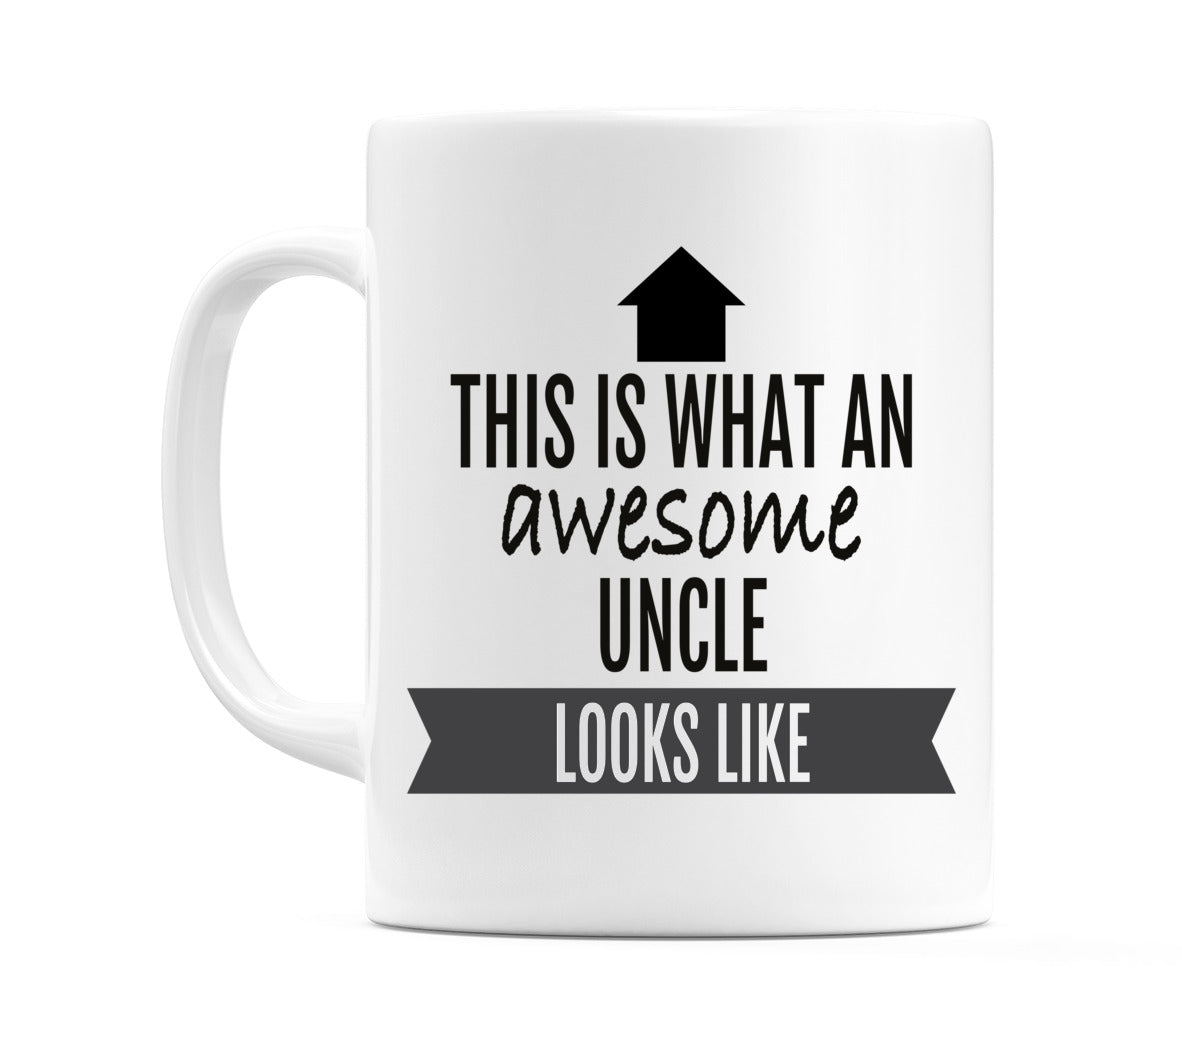 This is What an awesome Uncle Looks Like Mug